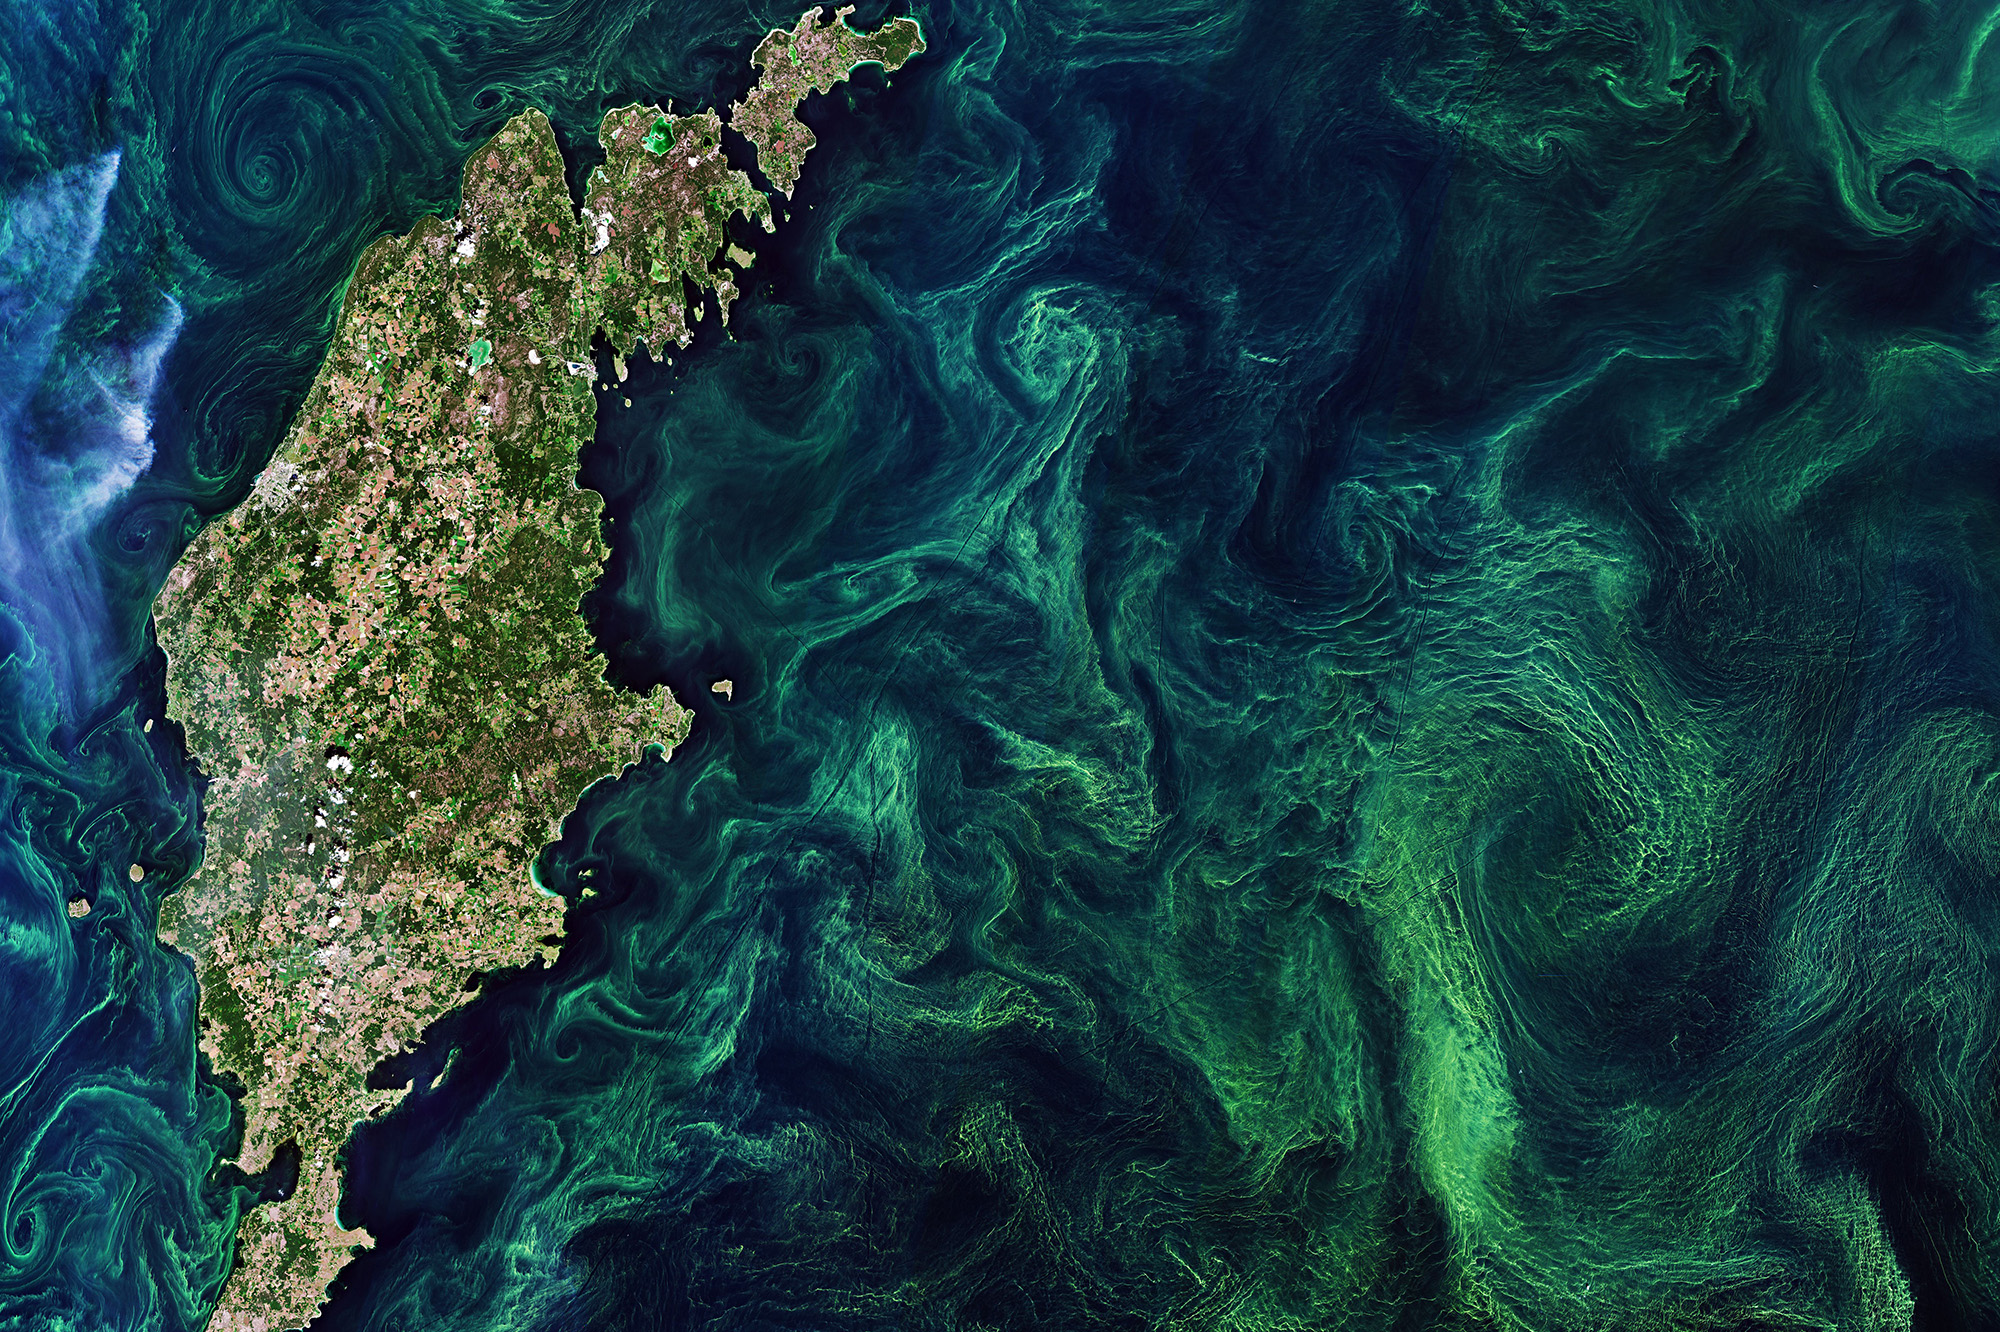 This Copernicus Sentinel-2 image captured in July 2019 shows spectacular algal blooms in the Baltic Sea, near the island of Gotland (Credit: ©contains modified Copernicus Sentinel data (2019), processed by ESA, CC BY-SA 3.0 IGO)